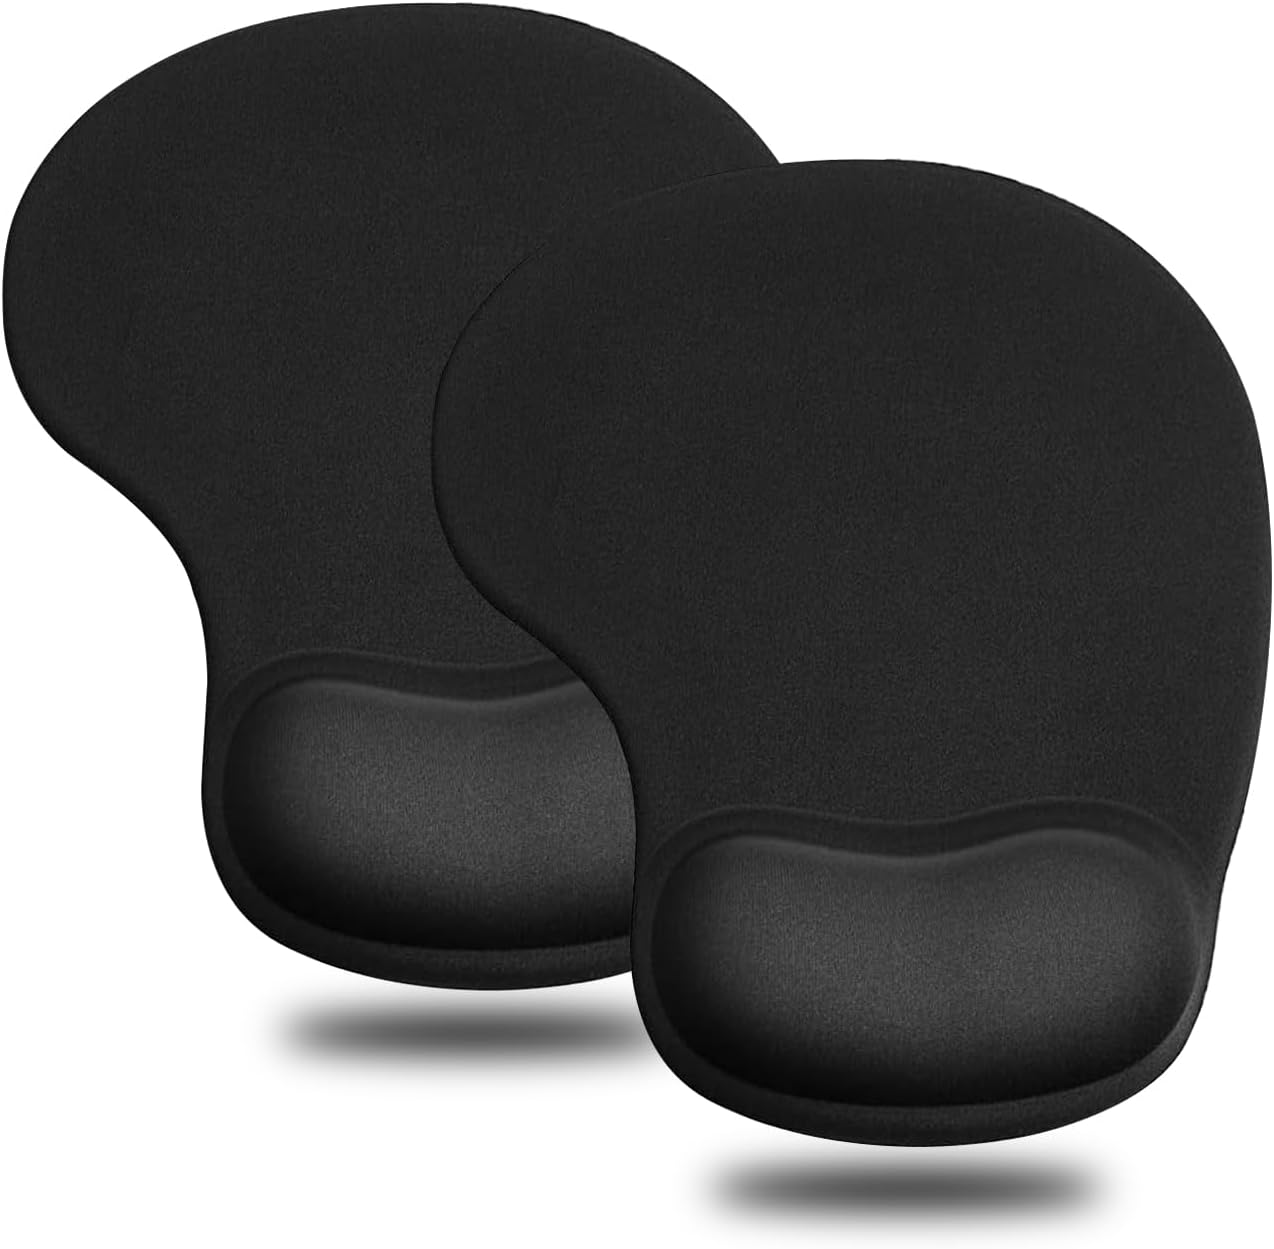 JIKIOU Mouse Pad, 2 Pack Ergonomic Mouse Pads with Comfortable Gel Wrist Rest Support and Lycra Cloth, Non-Slip PU Base for Easy Typing Pain Relief Durable and Easy to Clean Small Black